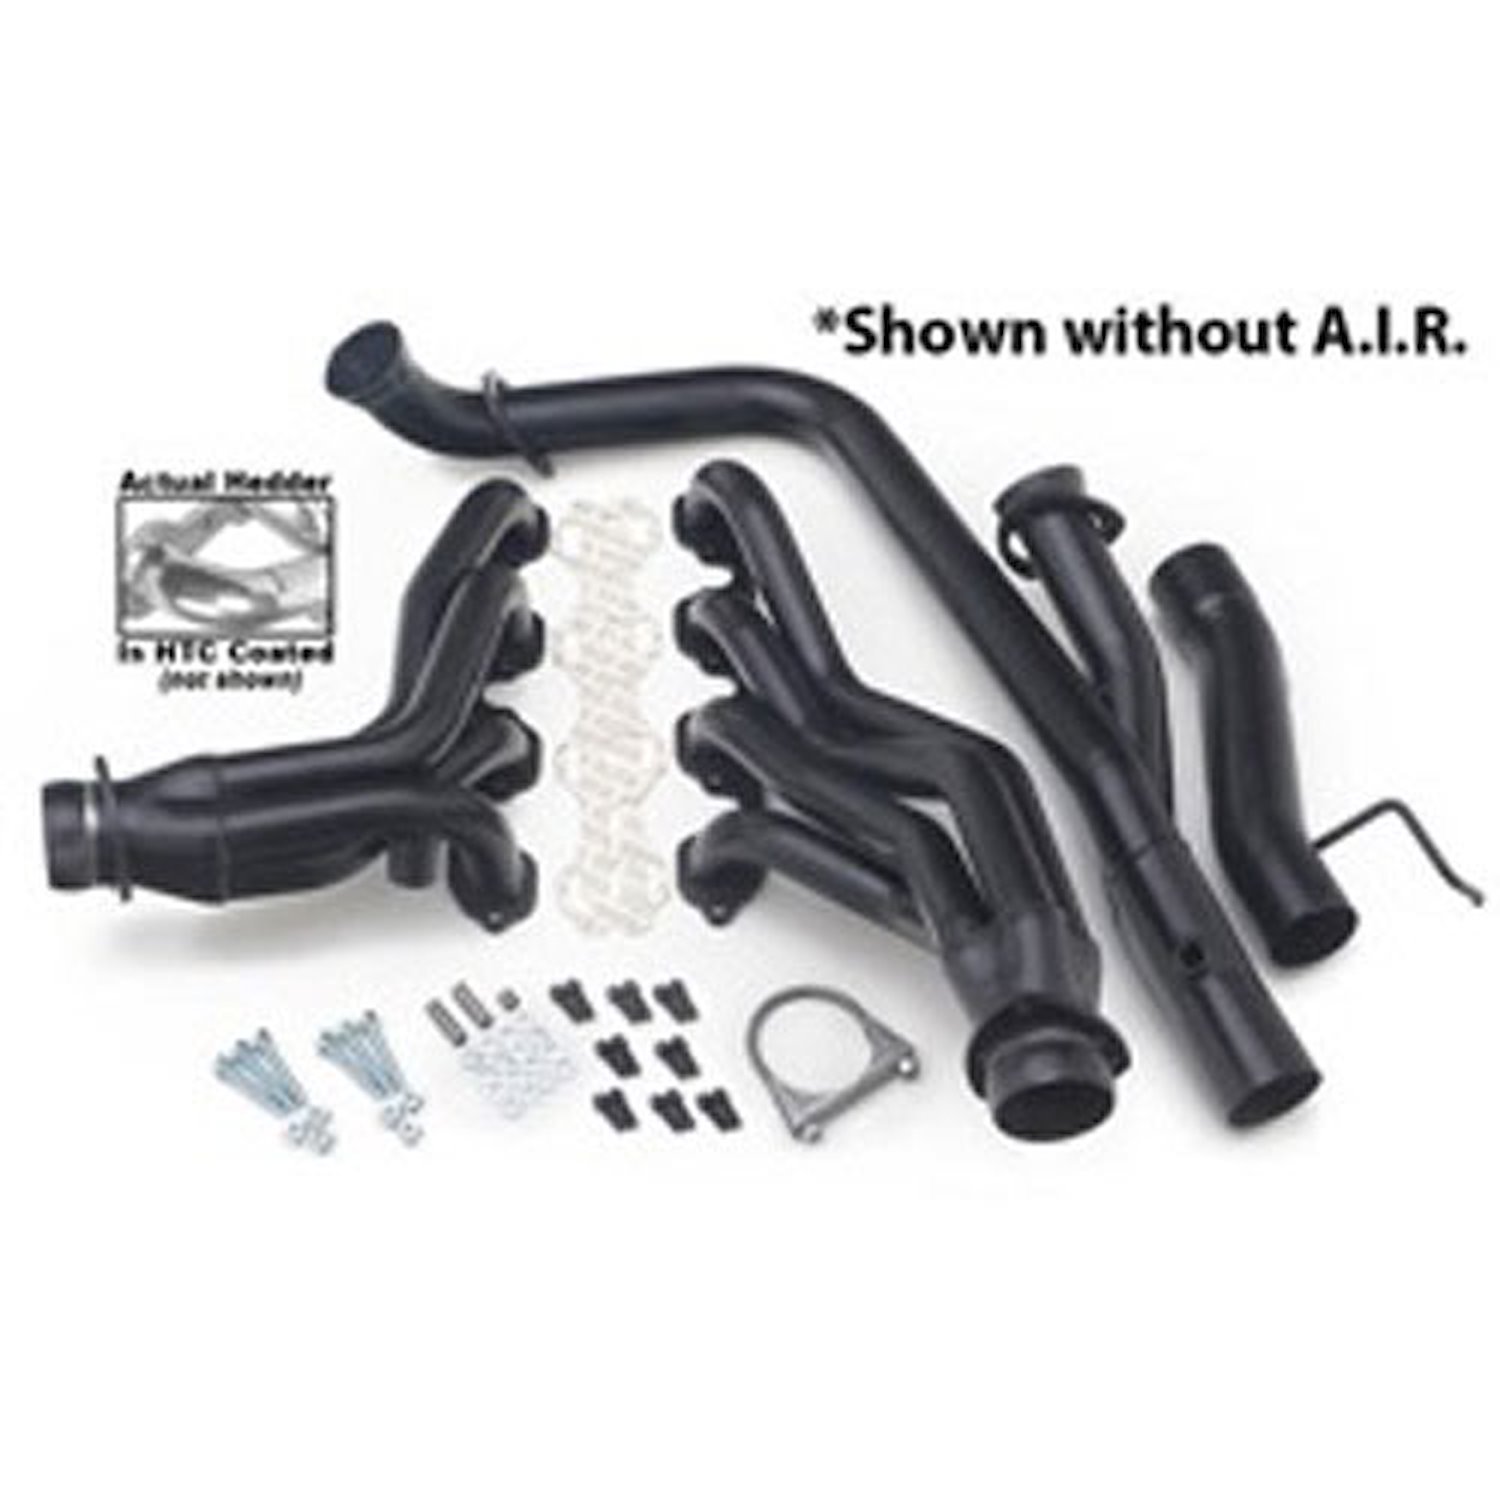 Standard Duty HTC Coated Shorty Headers 1988-97 Ford F-250/F-350 7.5L